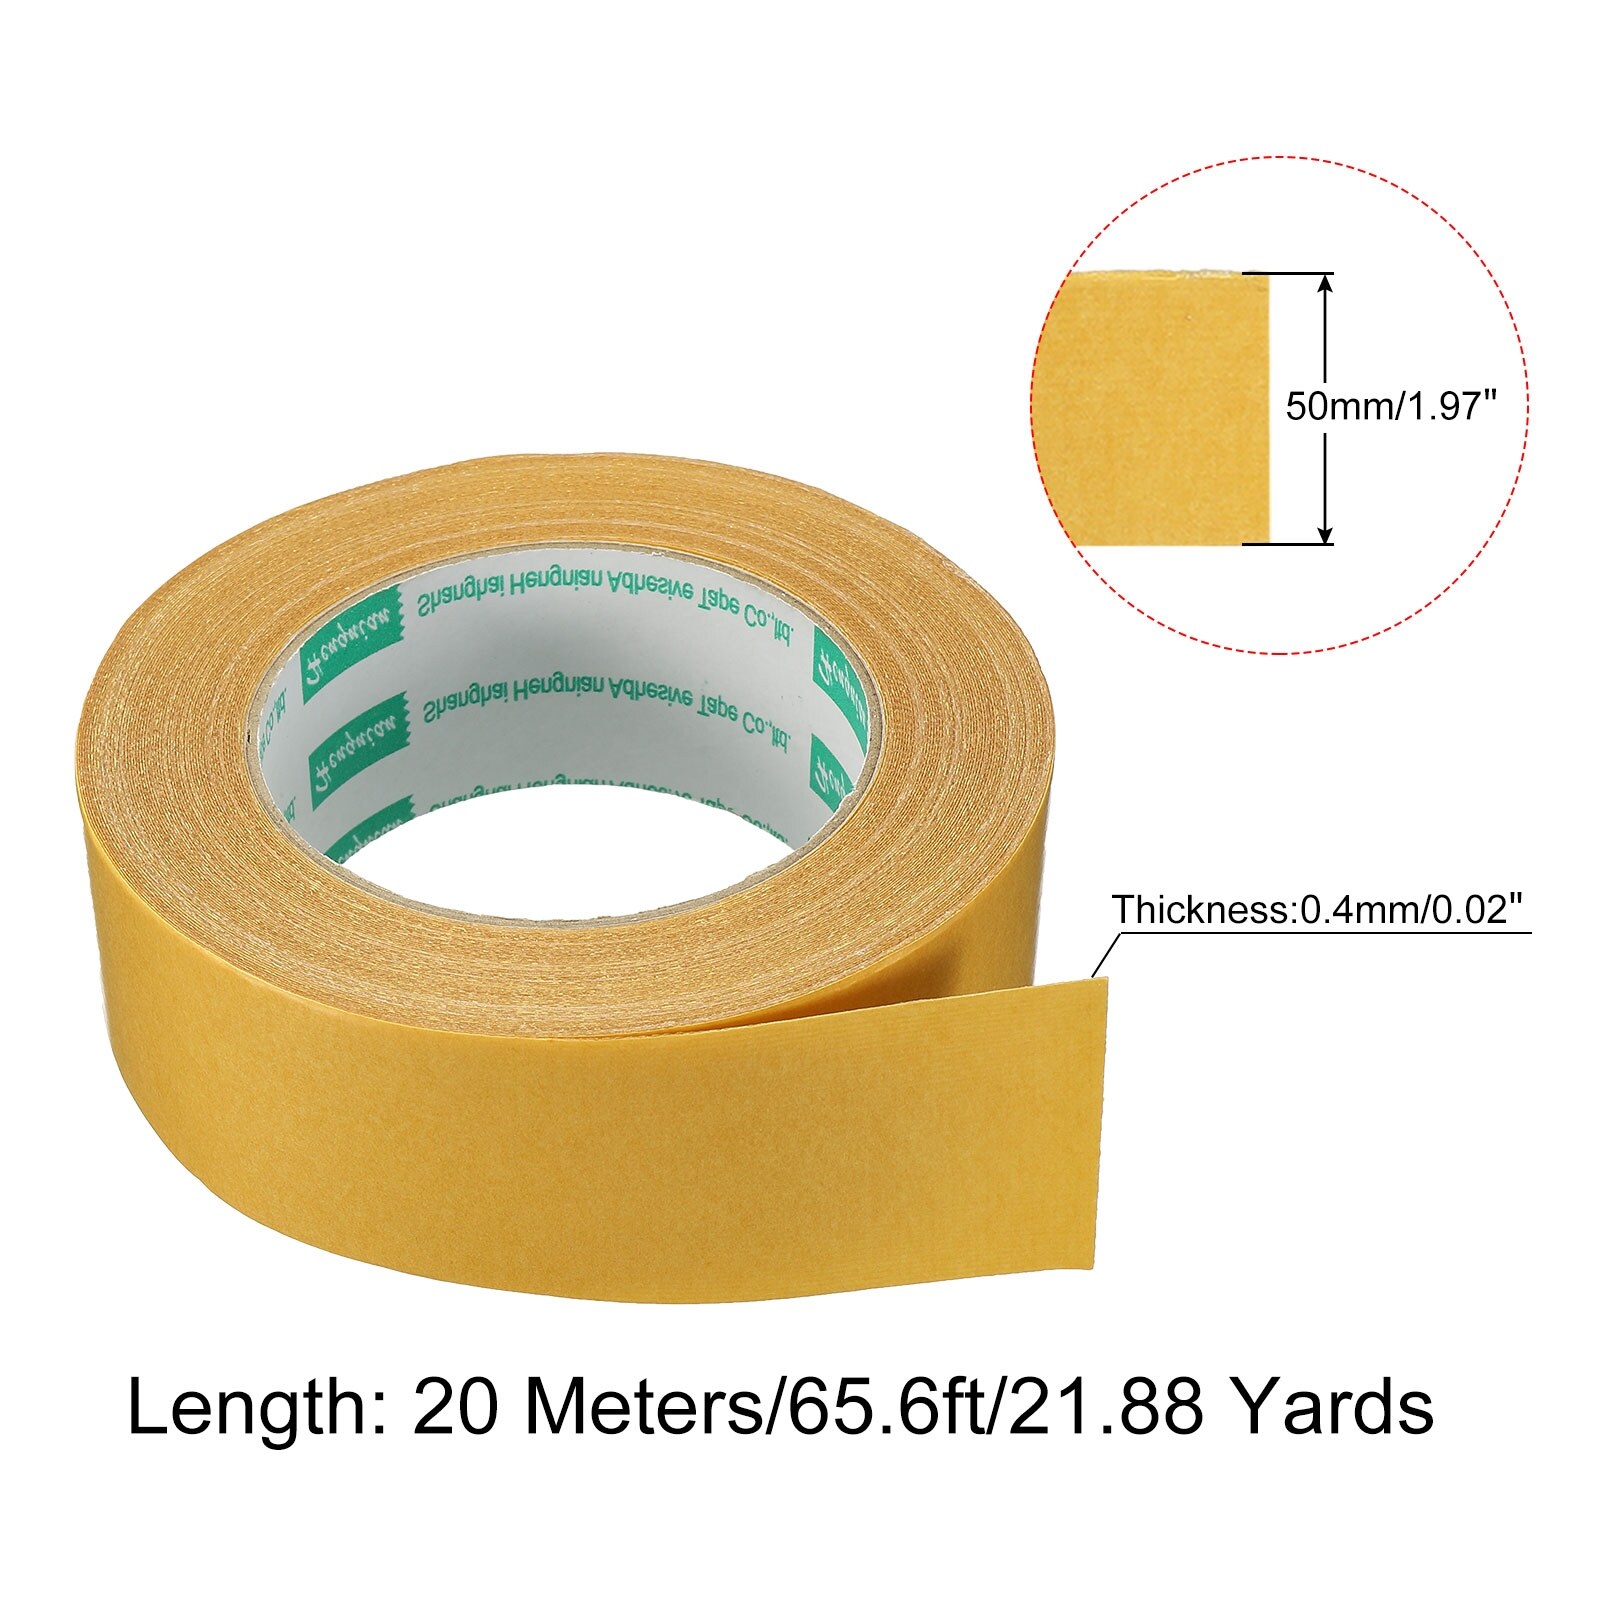 Double-Sided Adhesive Tape 10mm 18m/59ft Duct Cloth Mesh Fabric Yellow -  White - Bed Bath & Beyond - 35932052